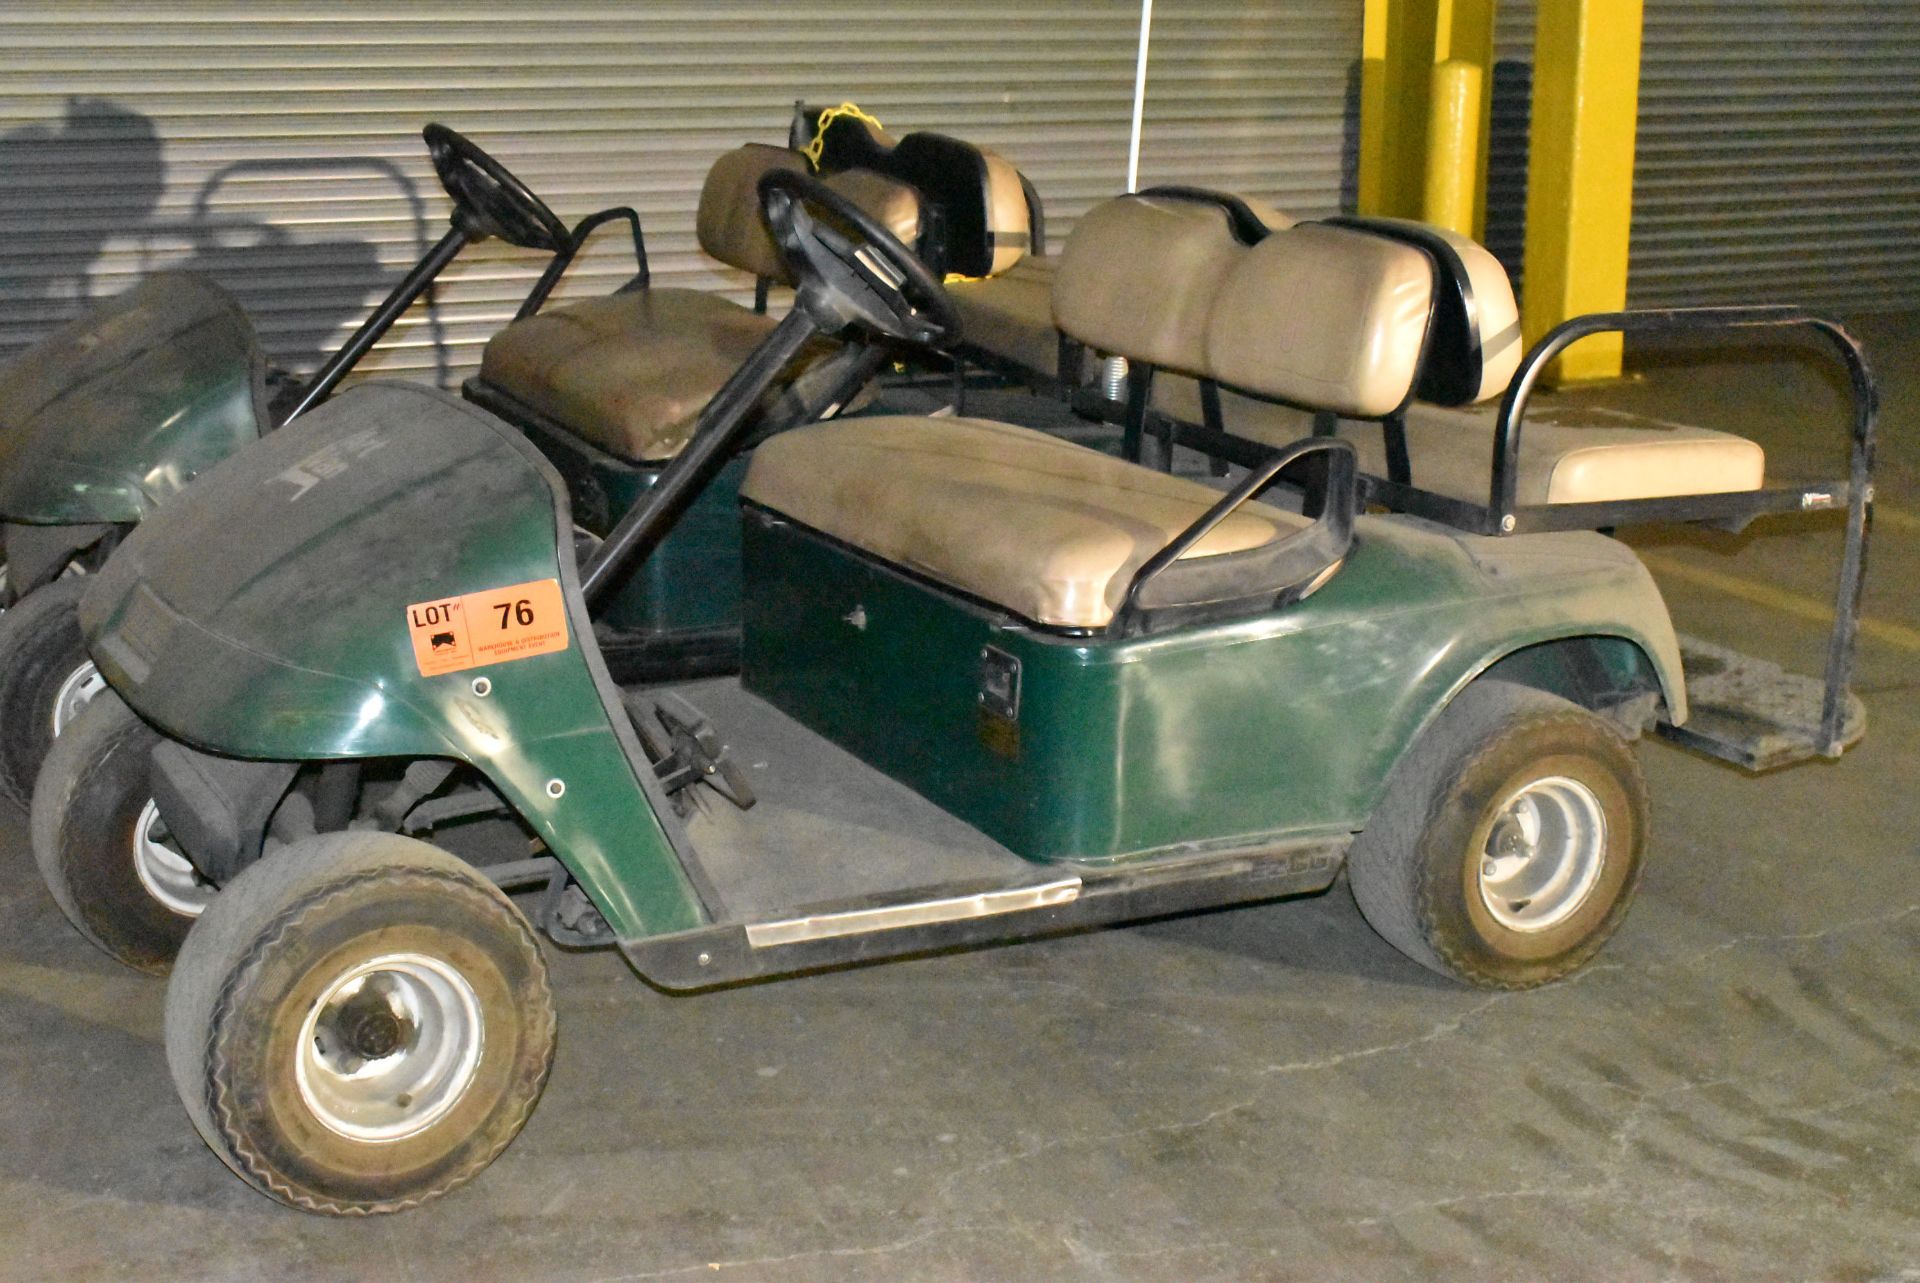 EZ-GO H202 ELECTRIC GOLF CART WITH REAR-FACING BENCH, S/N: N/A [RIGGING FEE FOR LOT #76 - $50 USD